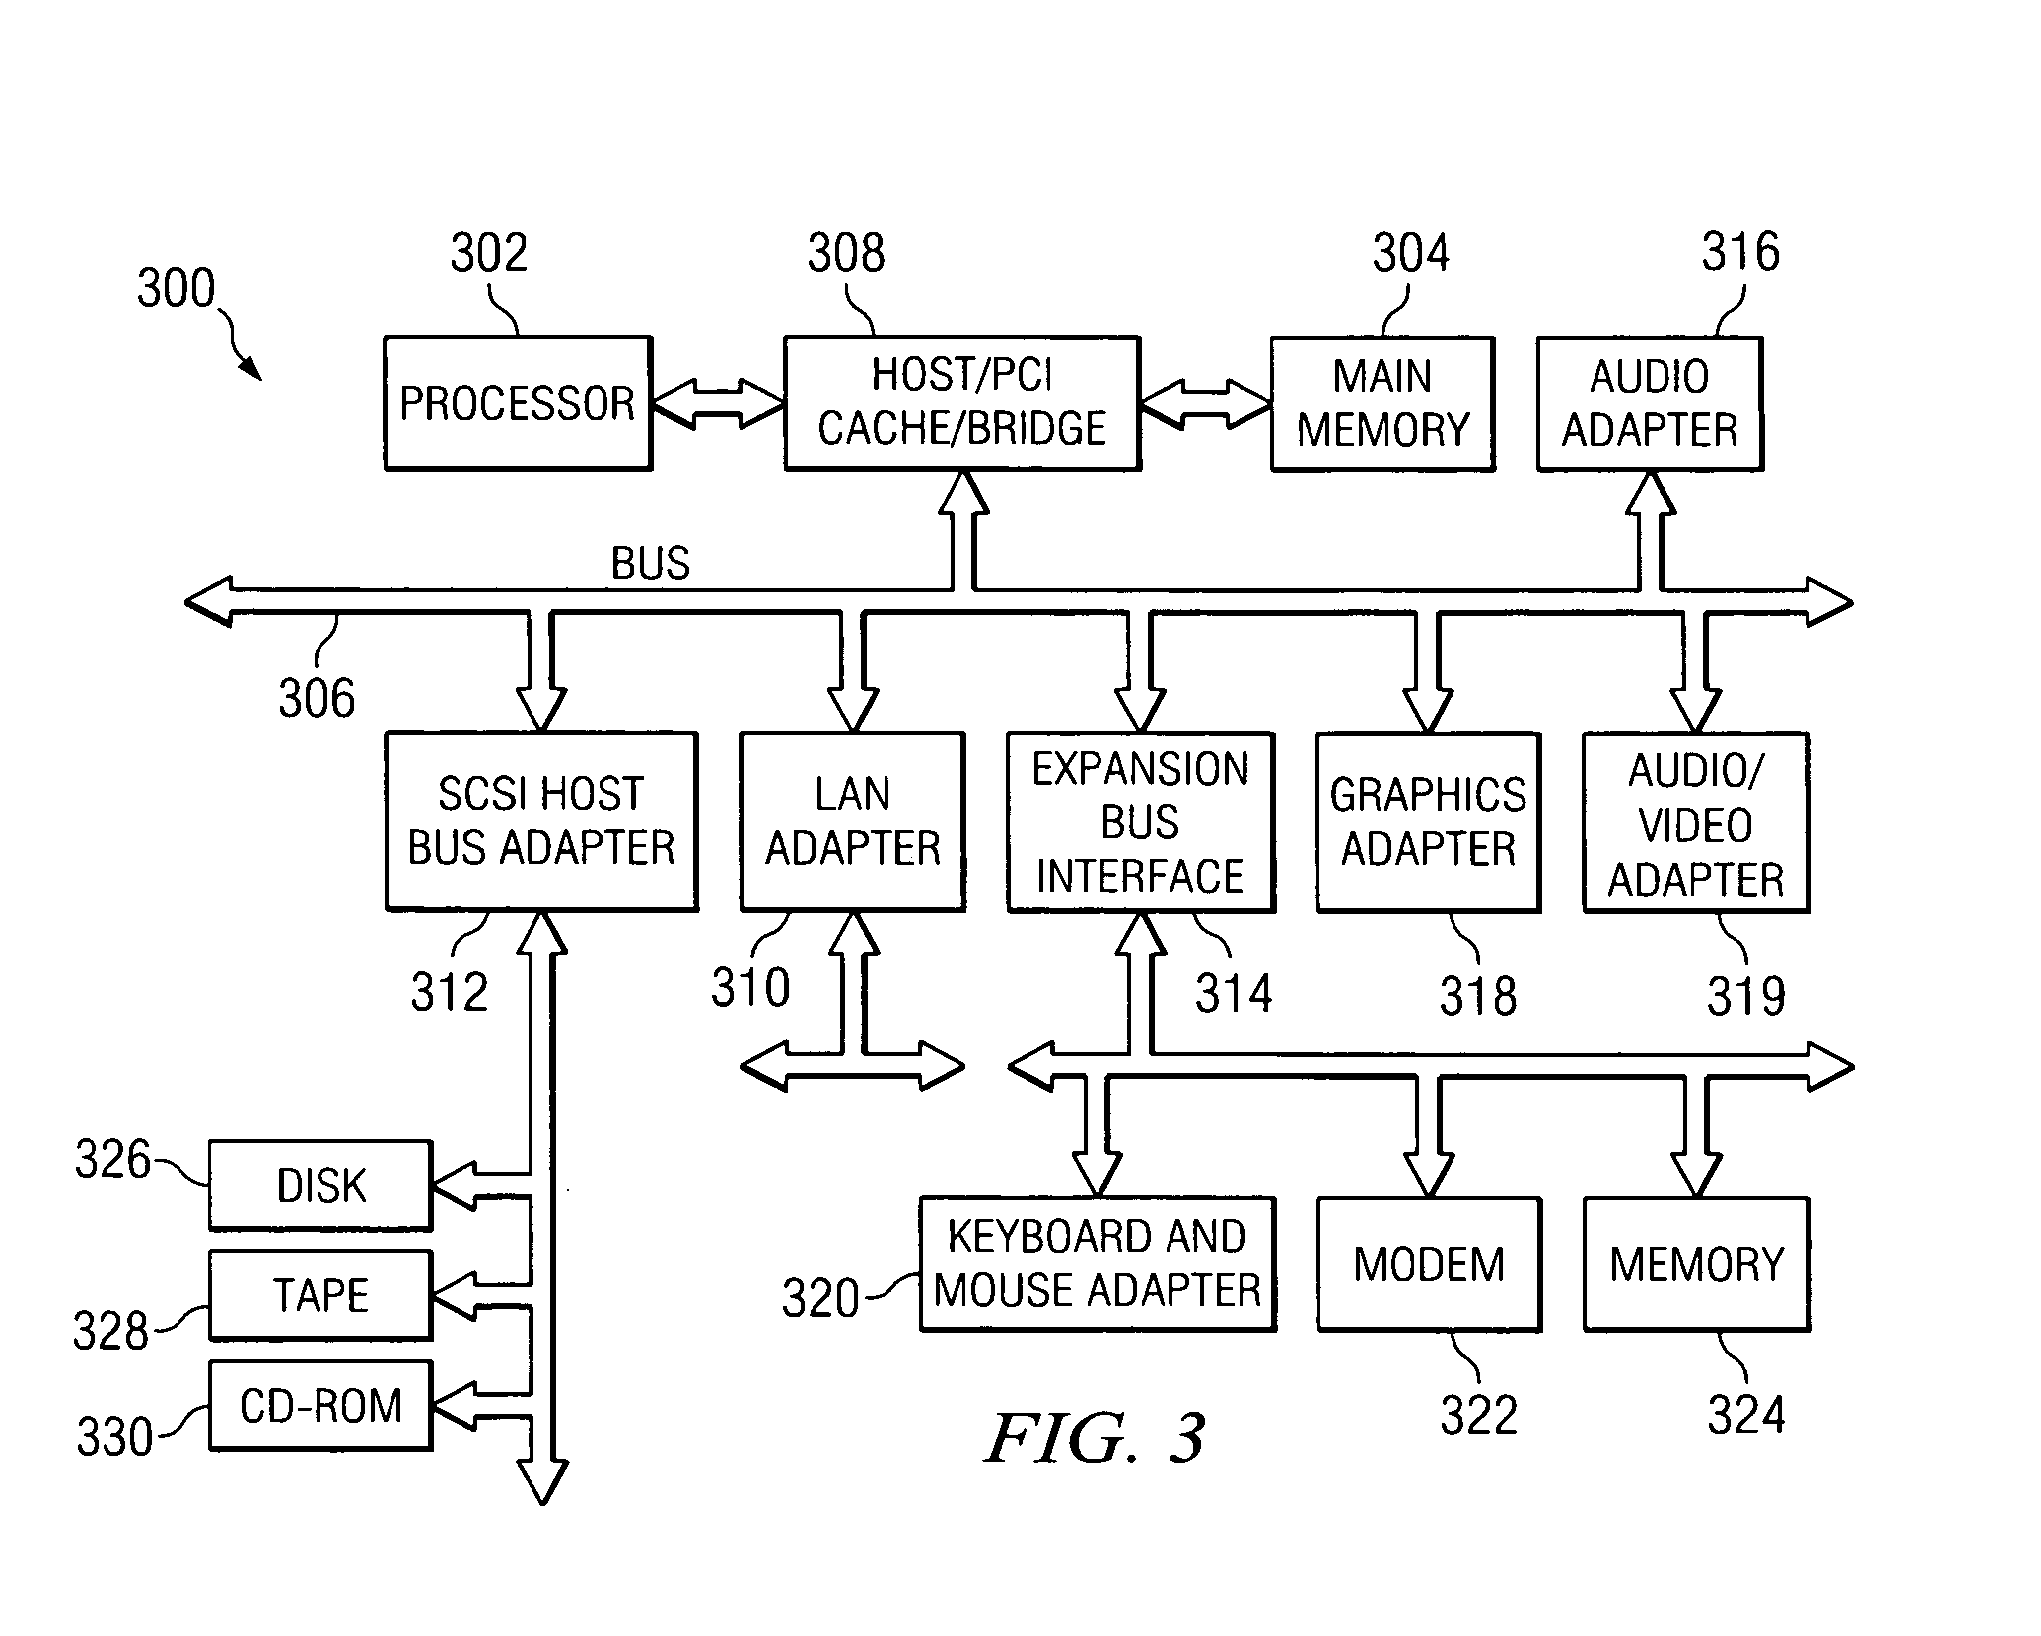 System and Method for Enhanced Layer of Security to Protect a File System from Malicious Programs